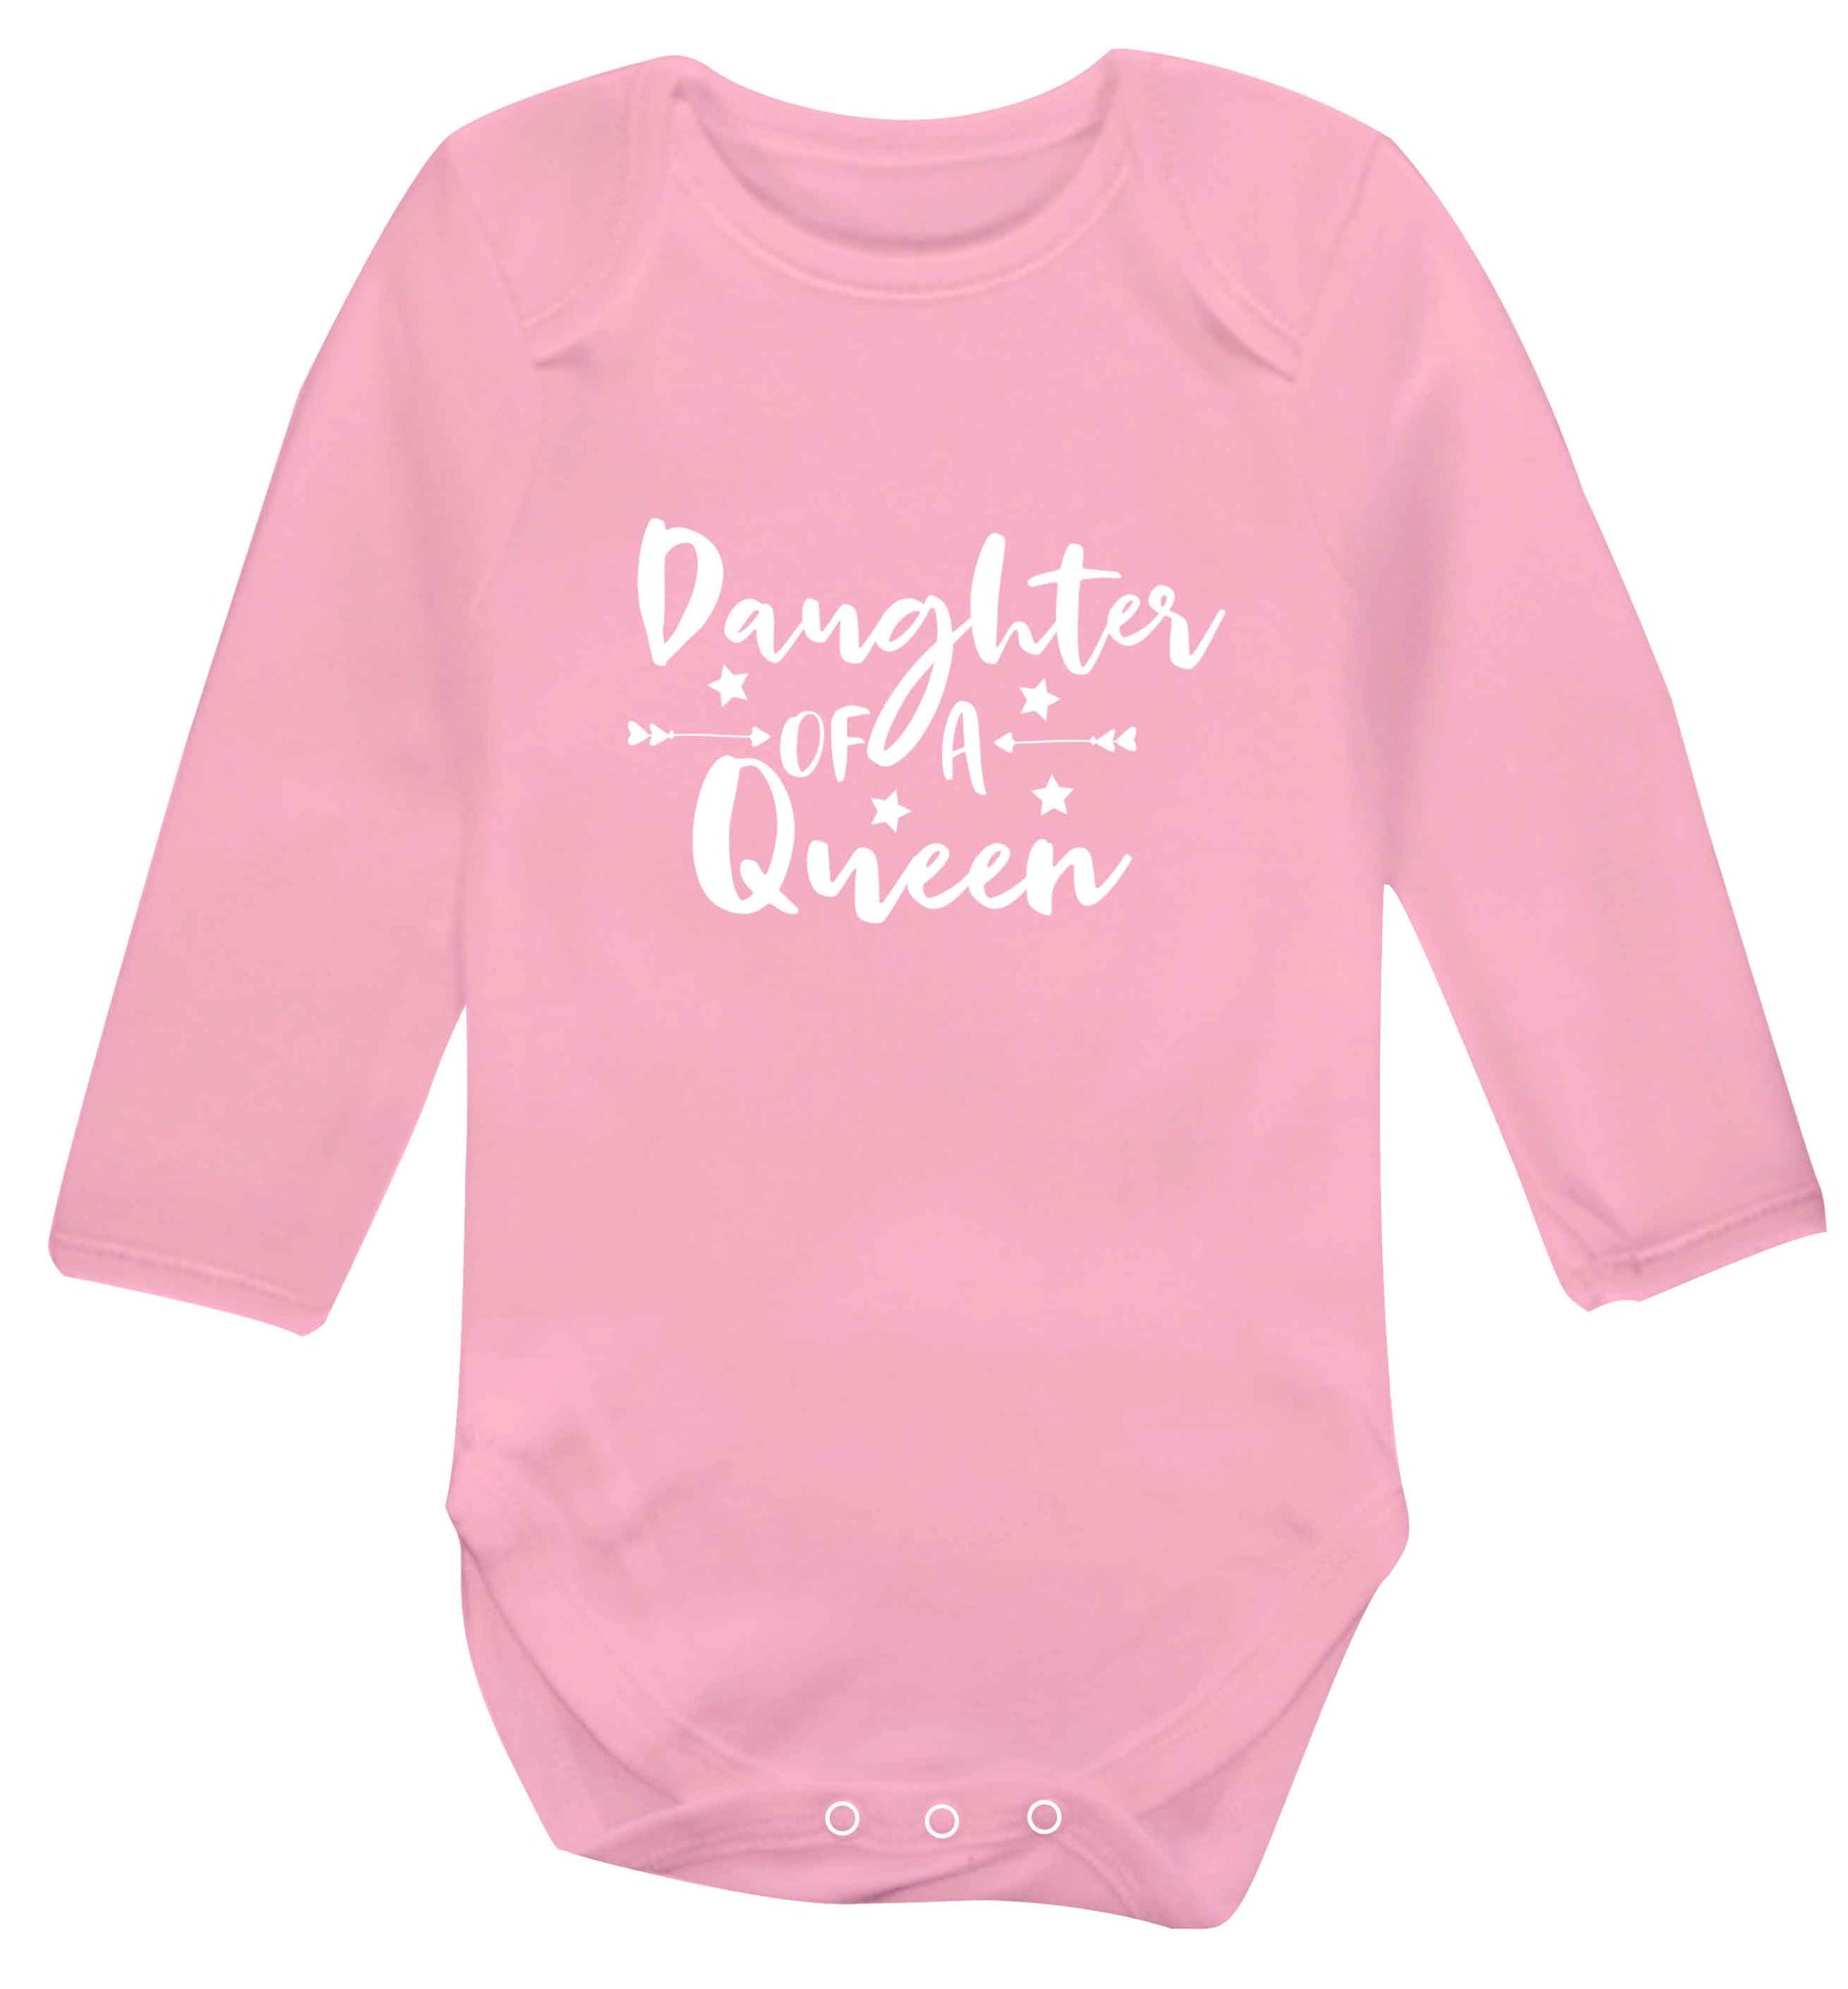 Daughter of a Queen baby vest long sleeved pale pink 6-12 months